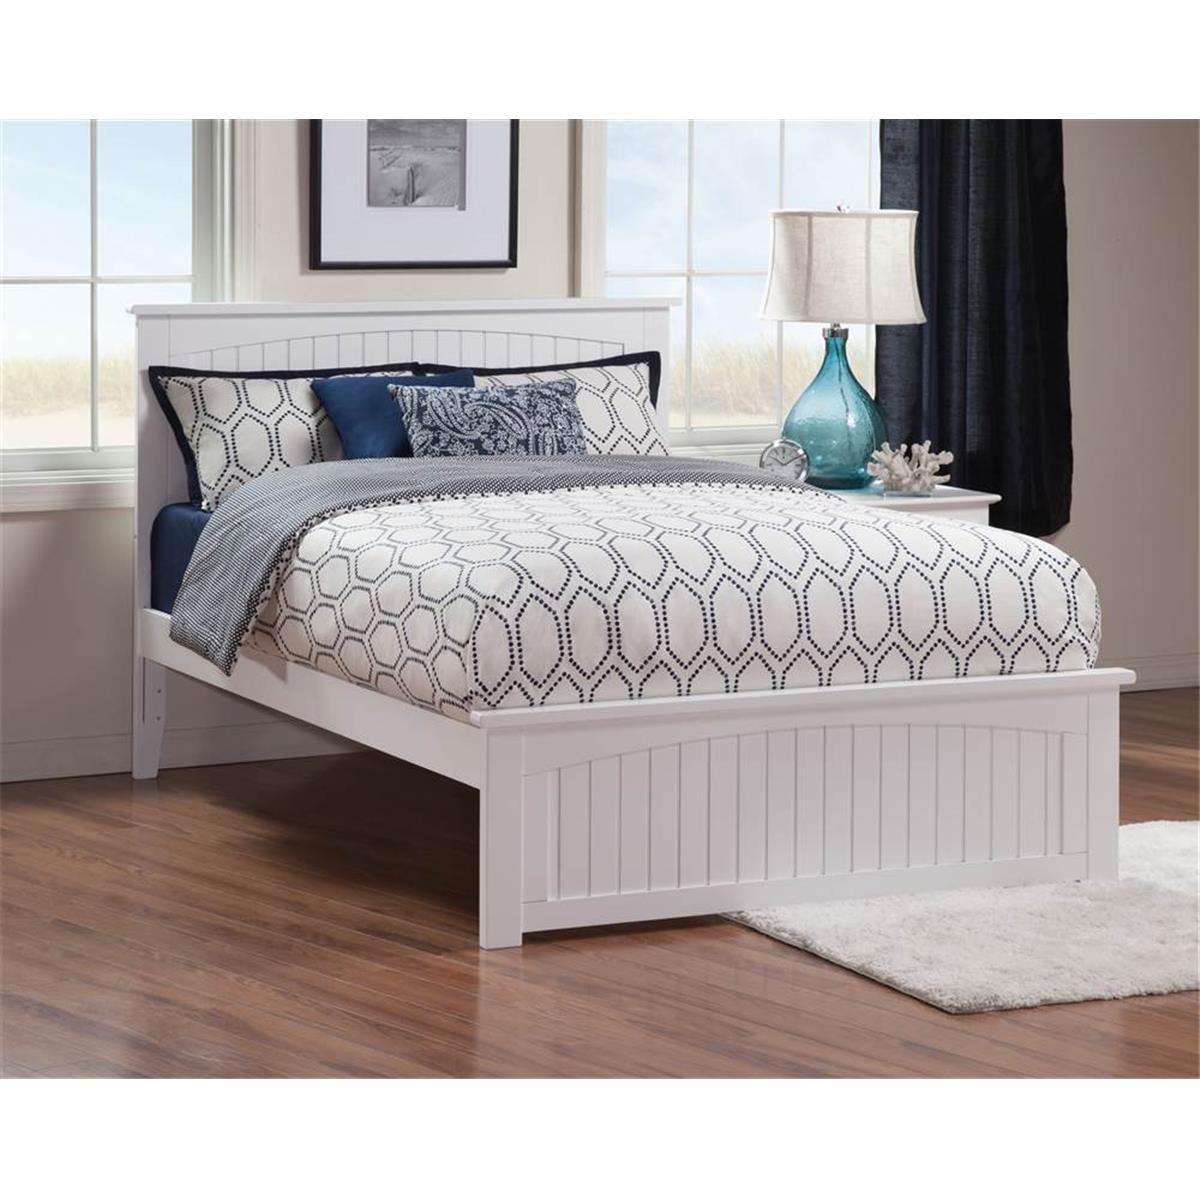 Picture of Atlantic Furniture AR8246032 Nantucket Bed with Match Footboard - White, Queen Size